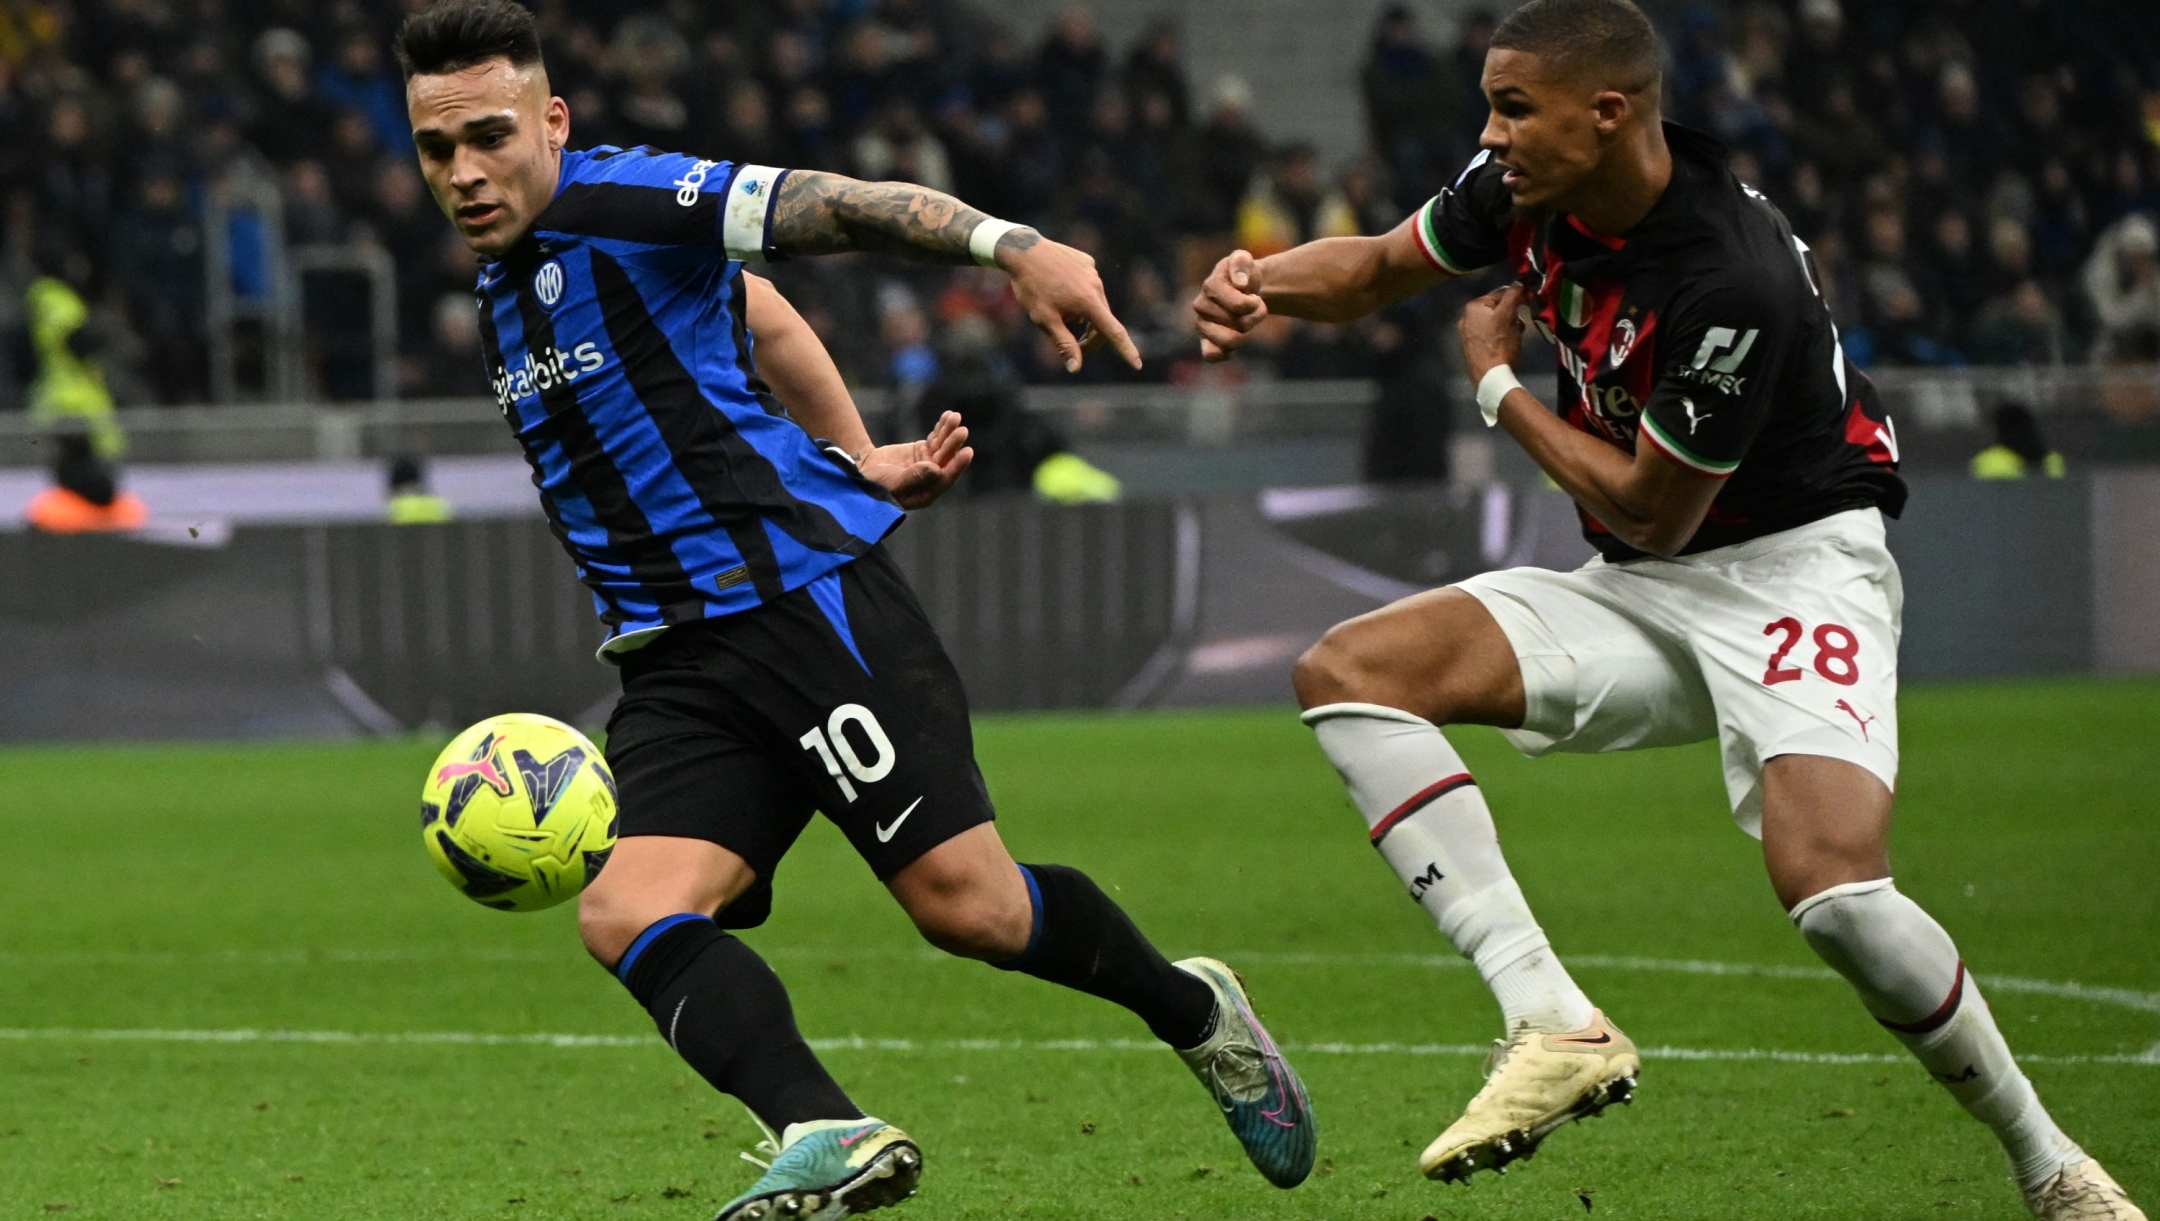 Inter Milan's Argentinian forward Lautaro Martinez outruns AC Milan's German-Finnish defender Malick Thiaw (R) during the Italian Serie A football match between Inter and AC Milan on February 5, 2023 at the San Siro stadium in Milan. (Photo by MIGUEL MEDINA / AFP)